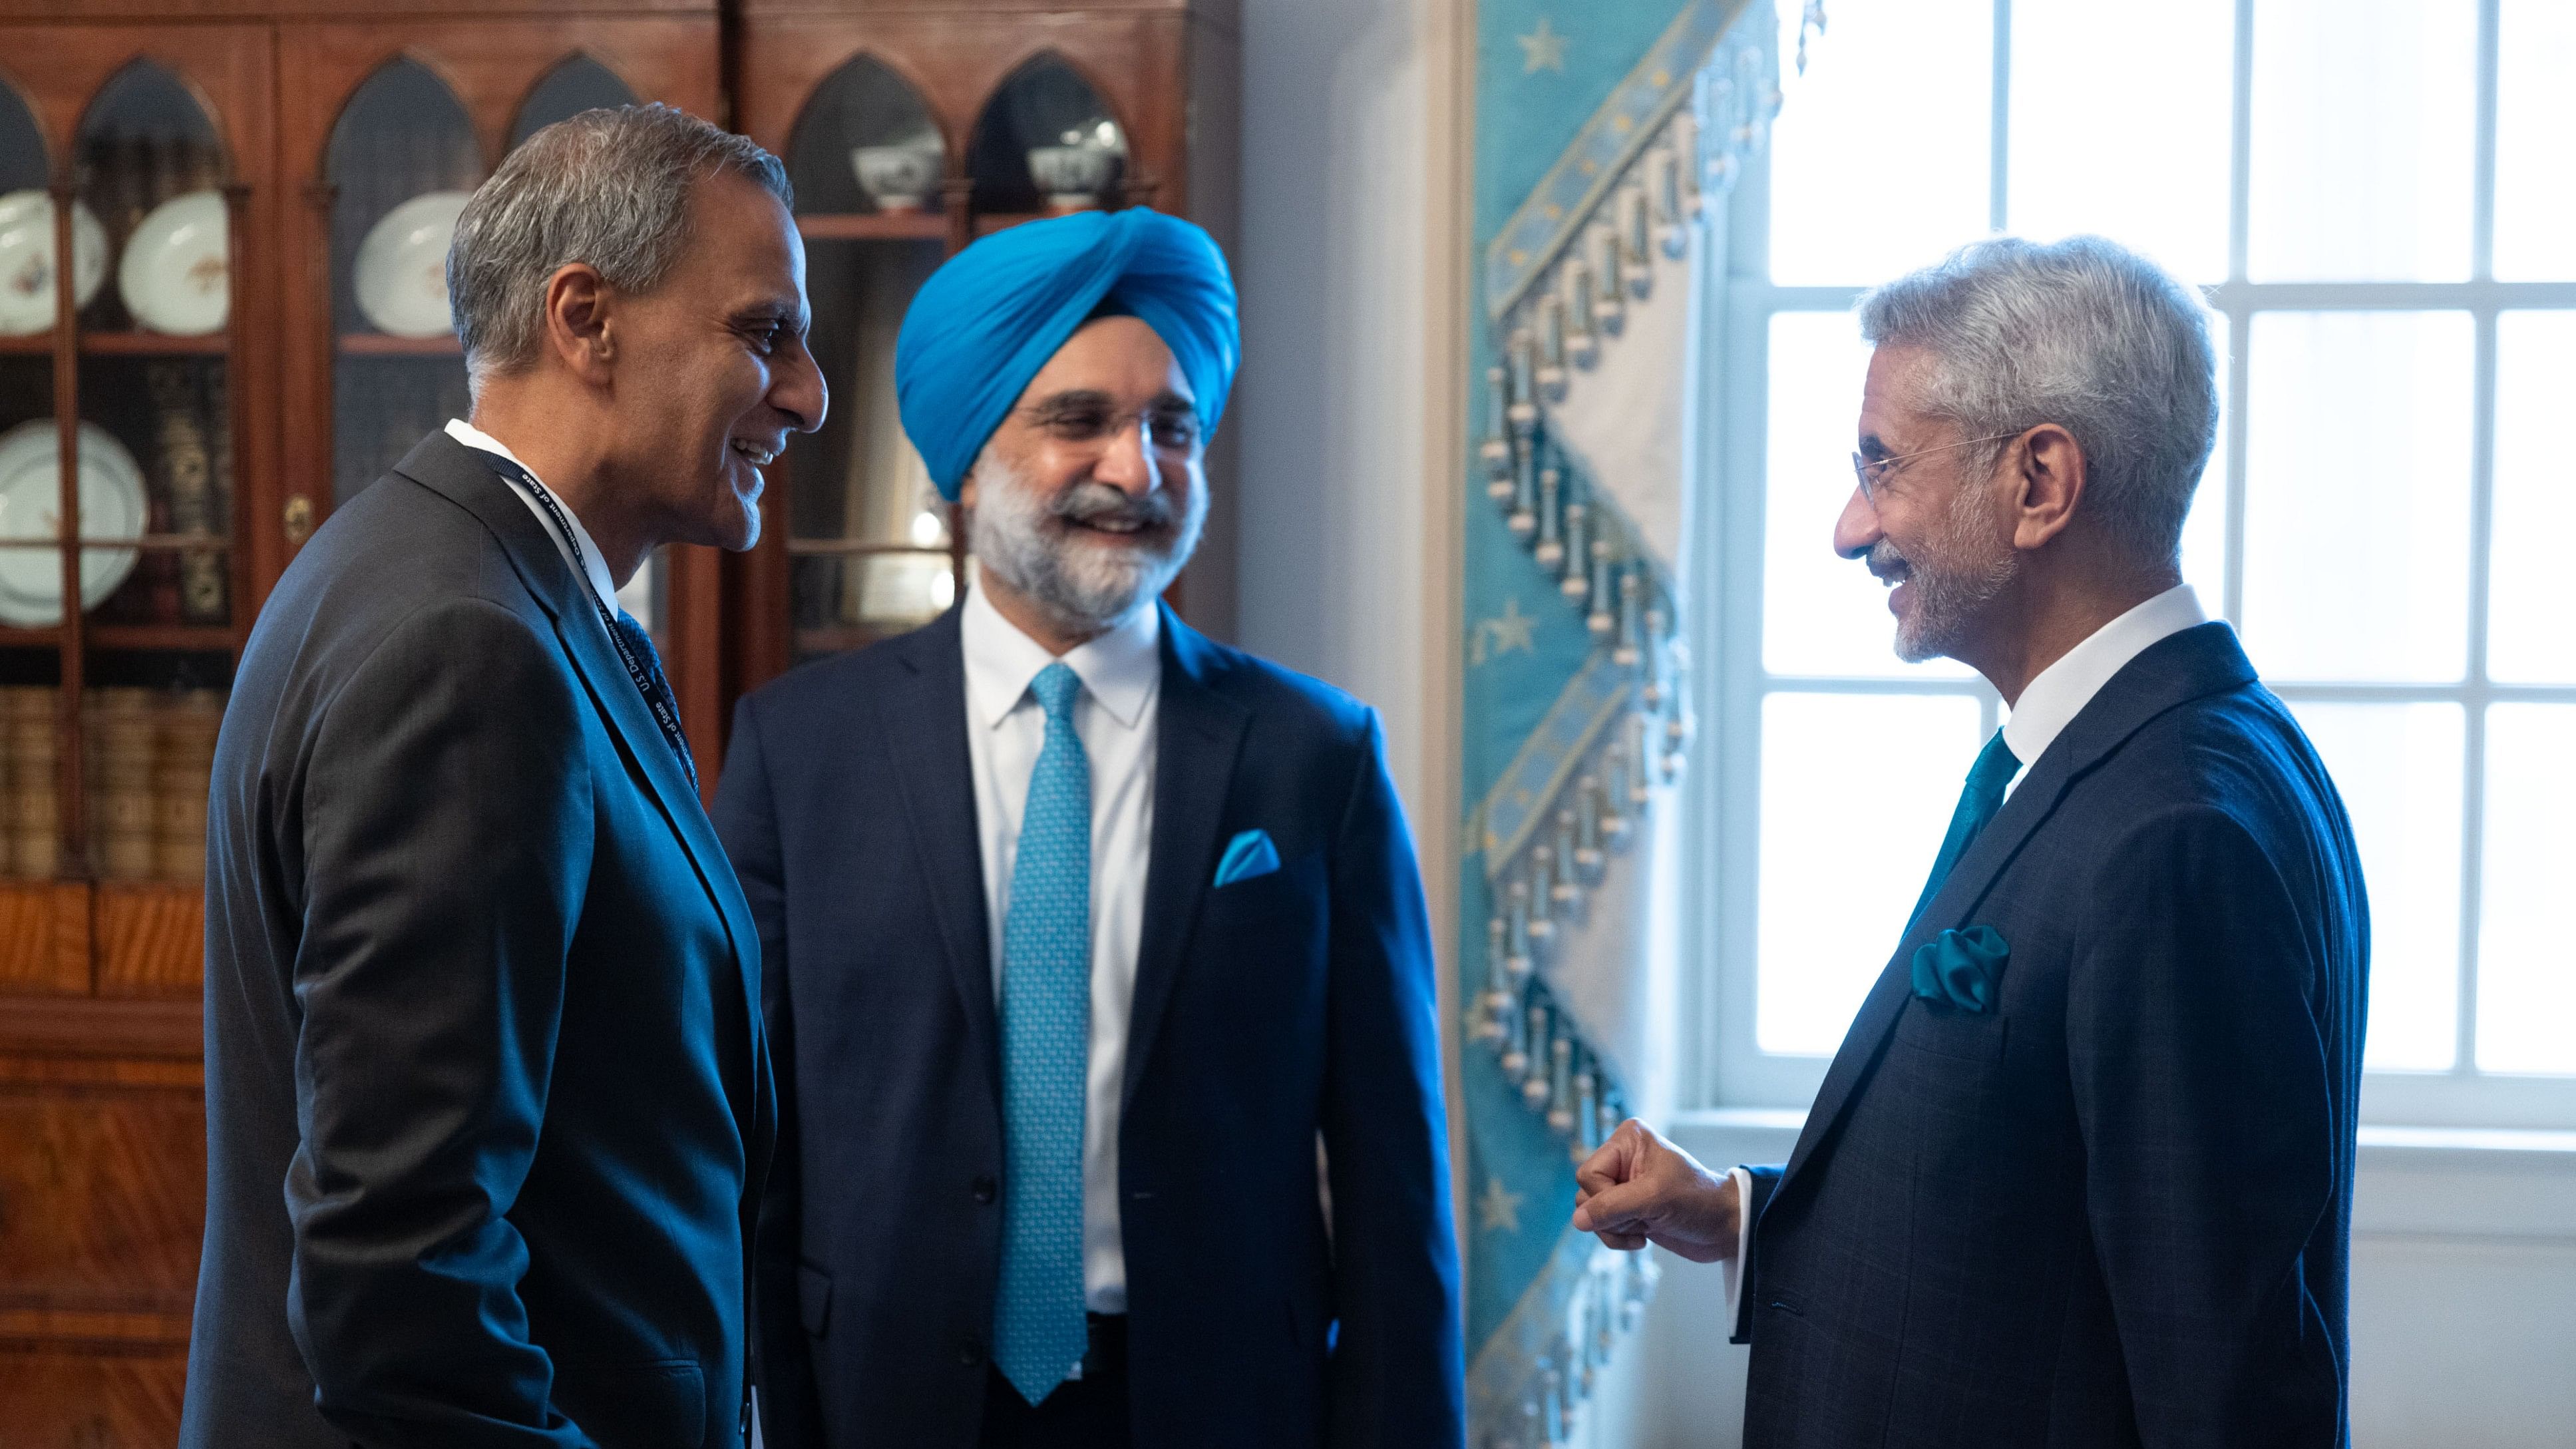 <div class="paragraphs"><p>Richard Verma, the Deputy Secretary of State for Management and Resources with Indian EAM S Jaishankar.</p></div>